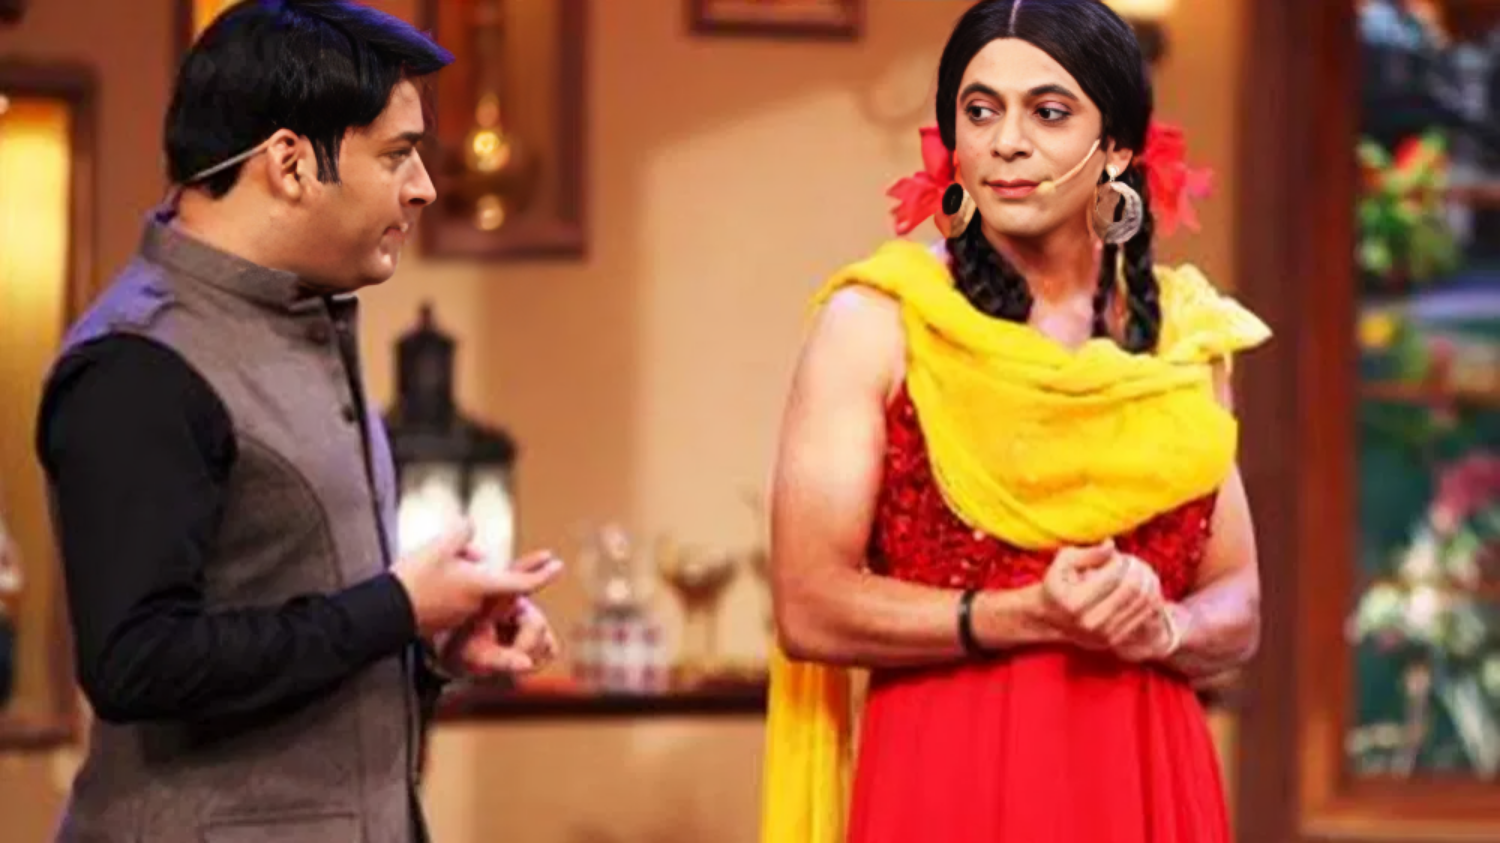 Get ready for belly laughs, the Kapil Sharma-Sunil Grover show is starting from this day. की तस्वीर